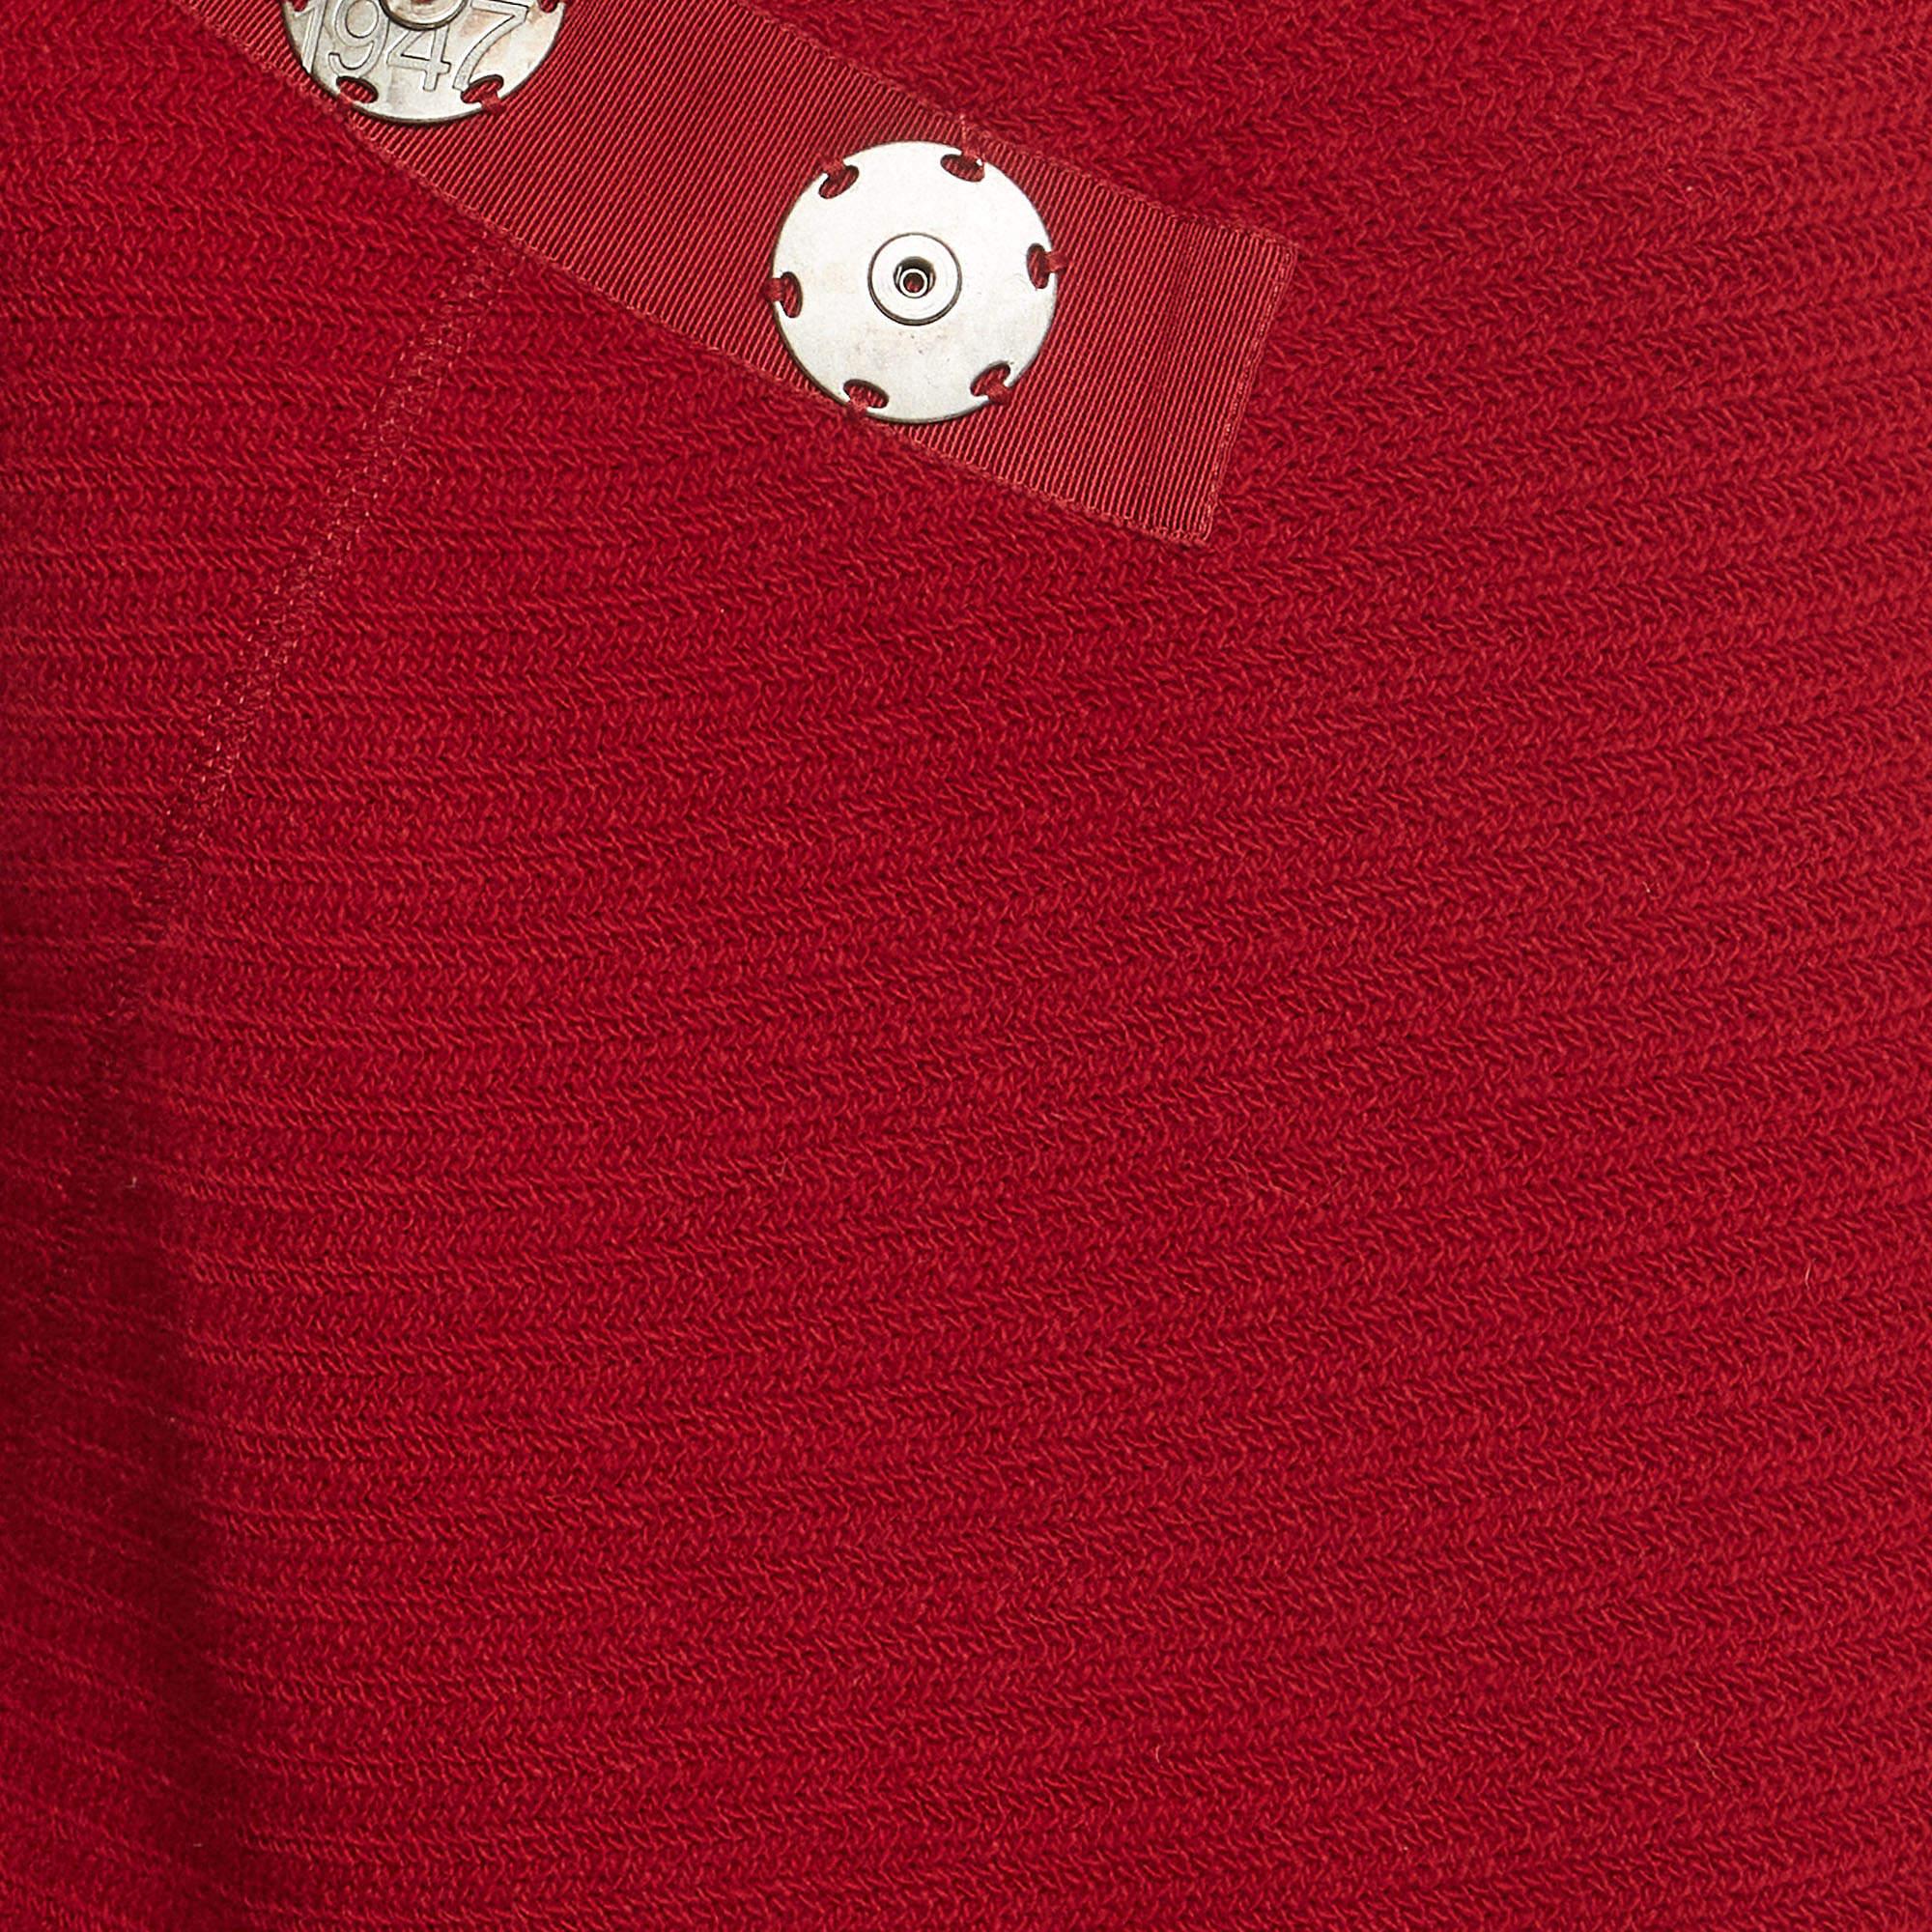 Christian Dior Boutique Red Wool Blend Knit Sweater L In Good Condition For Sale In Dubai, Al Qouz 2